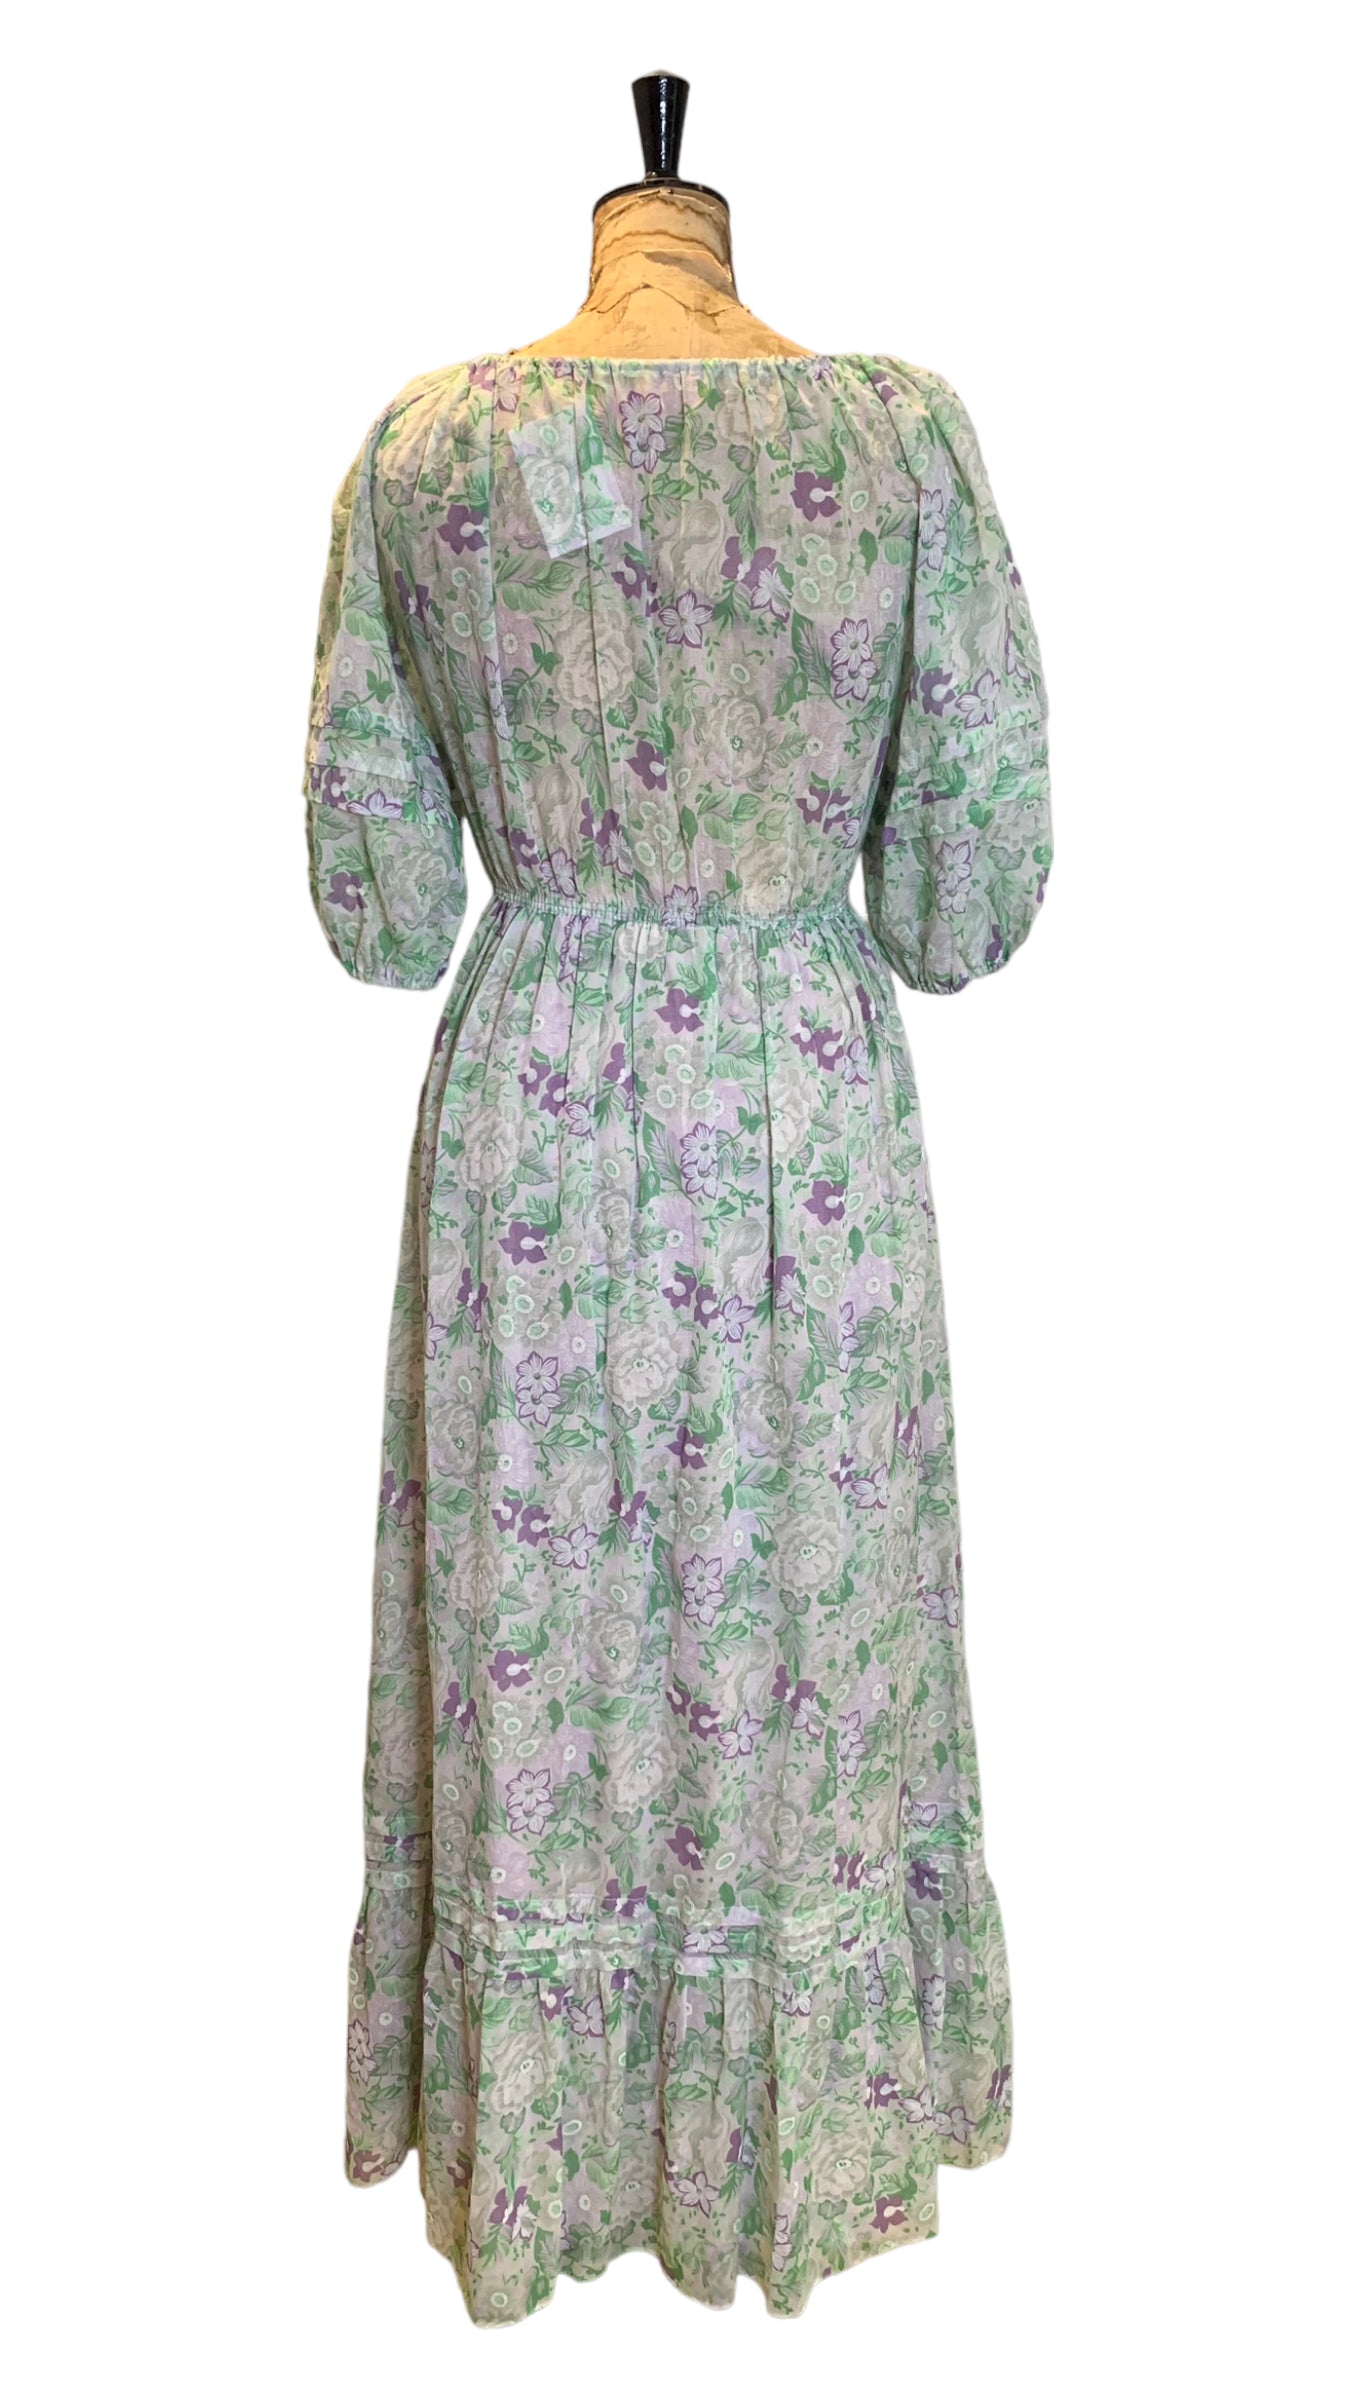 70s Vintage Green and Purple Maxi Dress Size UK 12 - 14